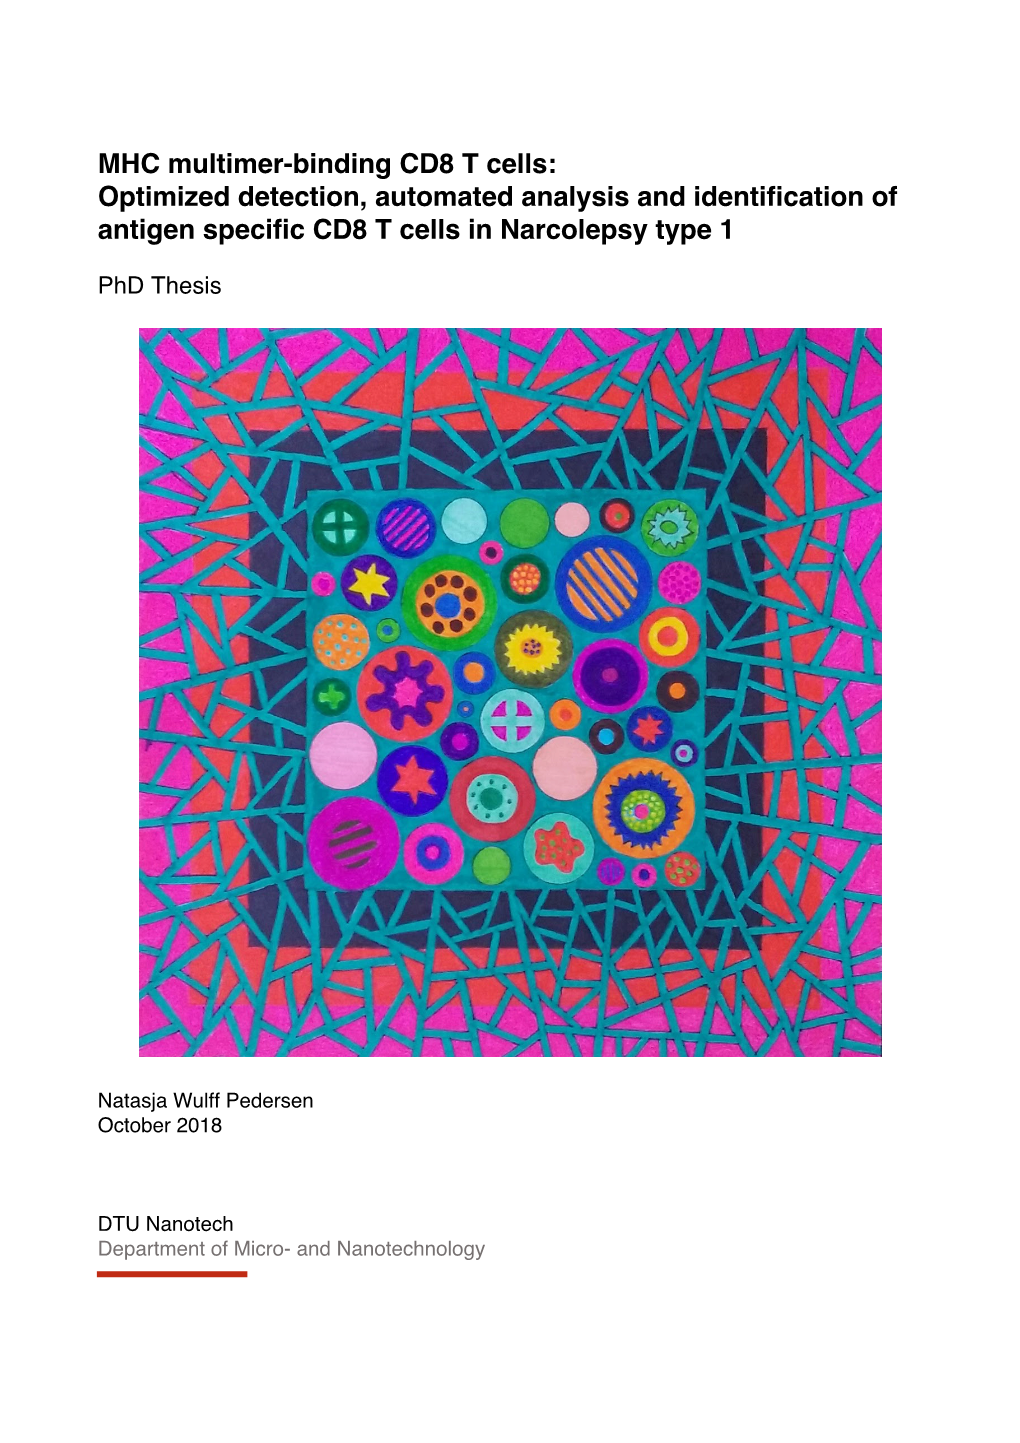 MHC Multimer-Binding CD8 T Cells: Optimized Detection, Automated Analysis and Identification of Antigen Specific CD8 T Cells in Narcolepsy Type 1